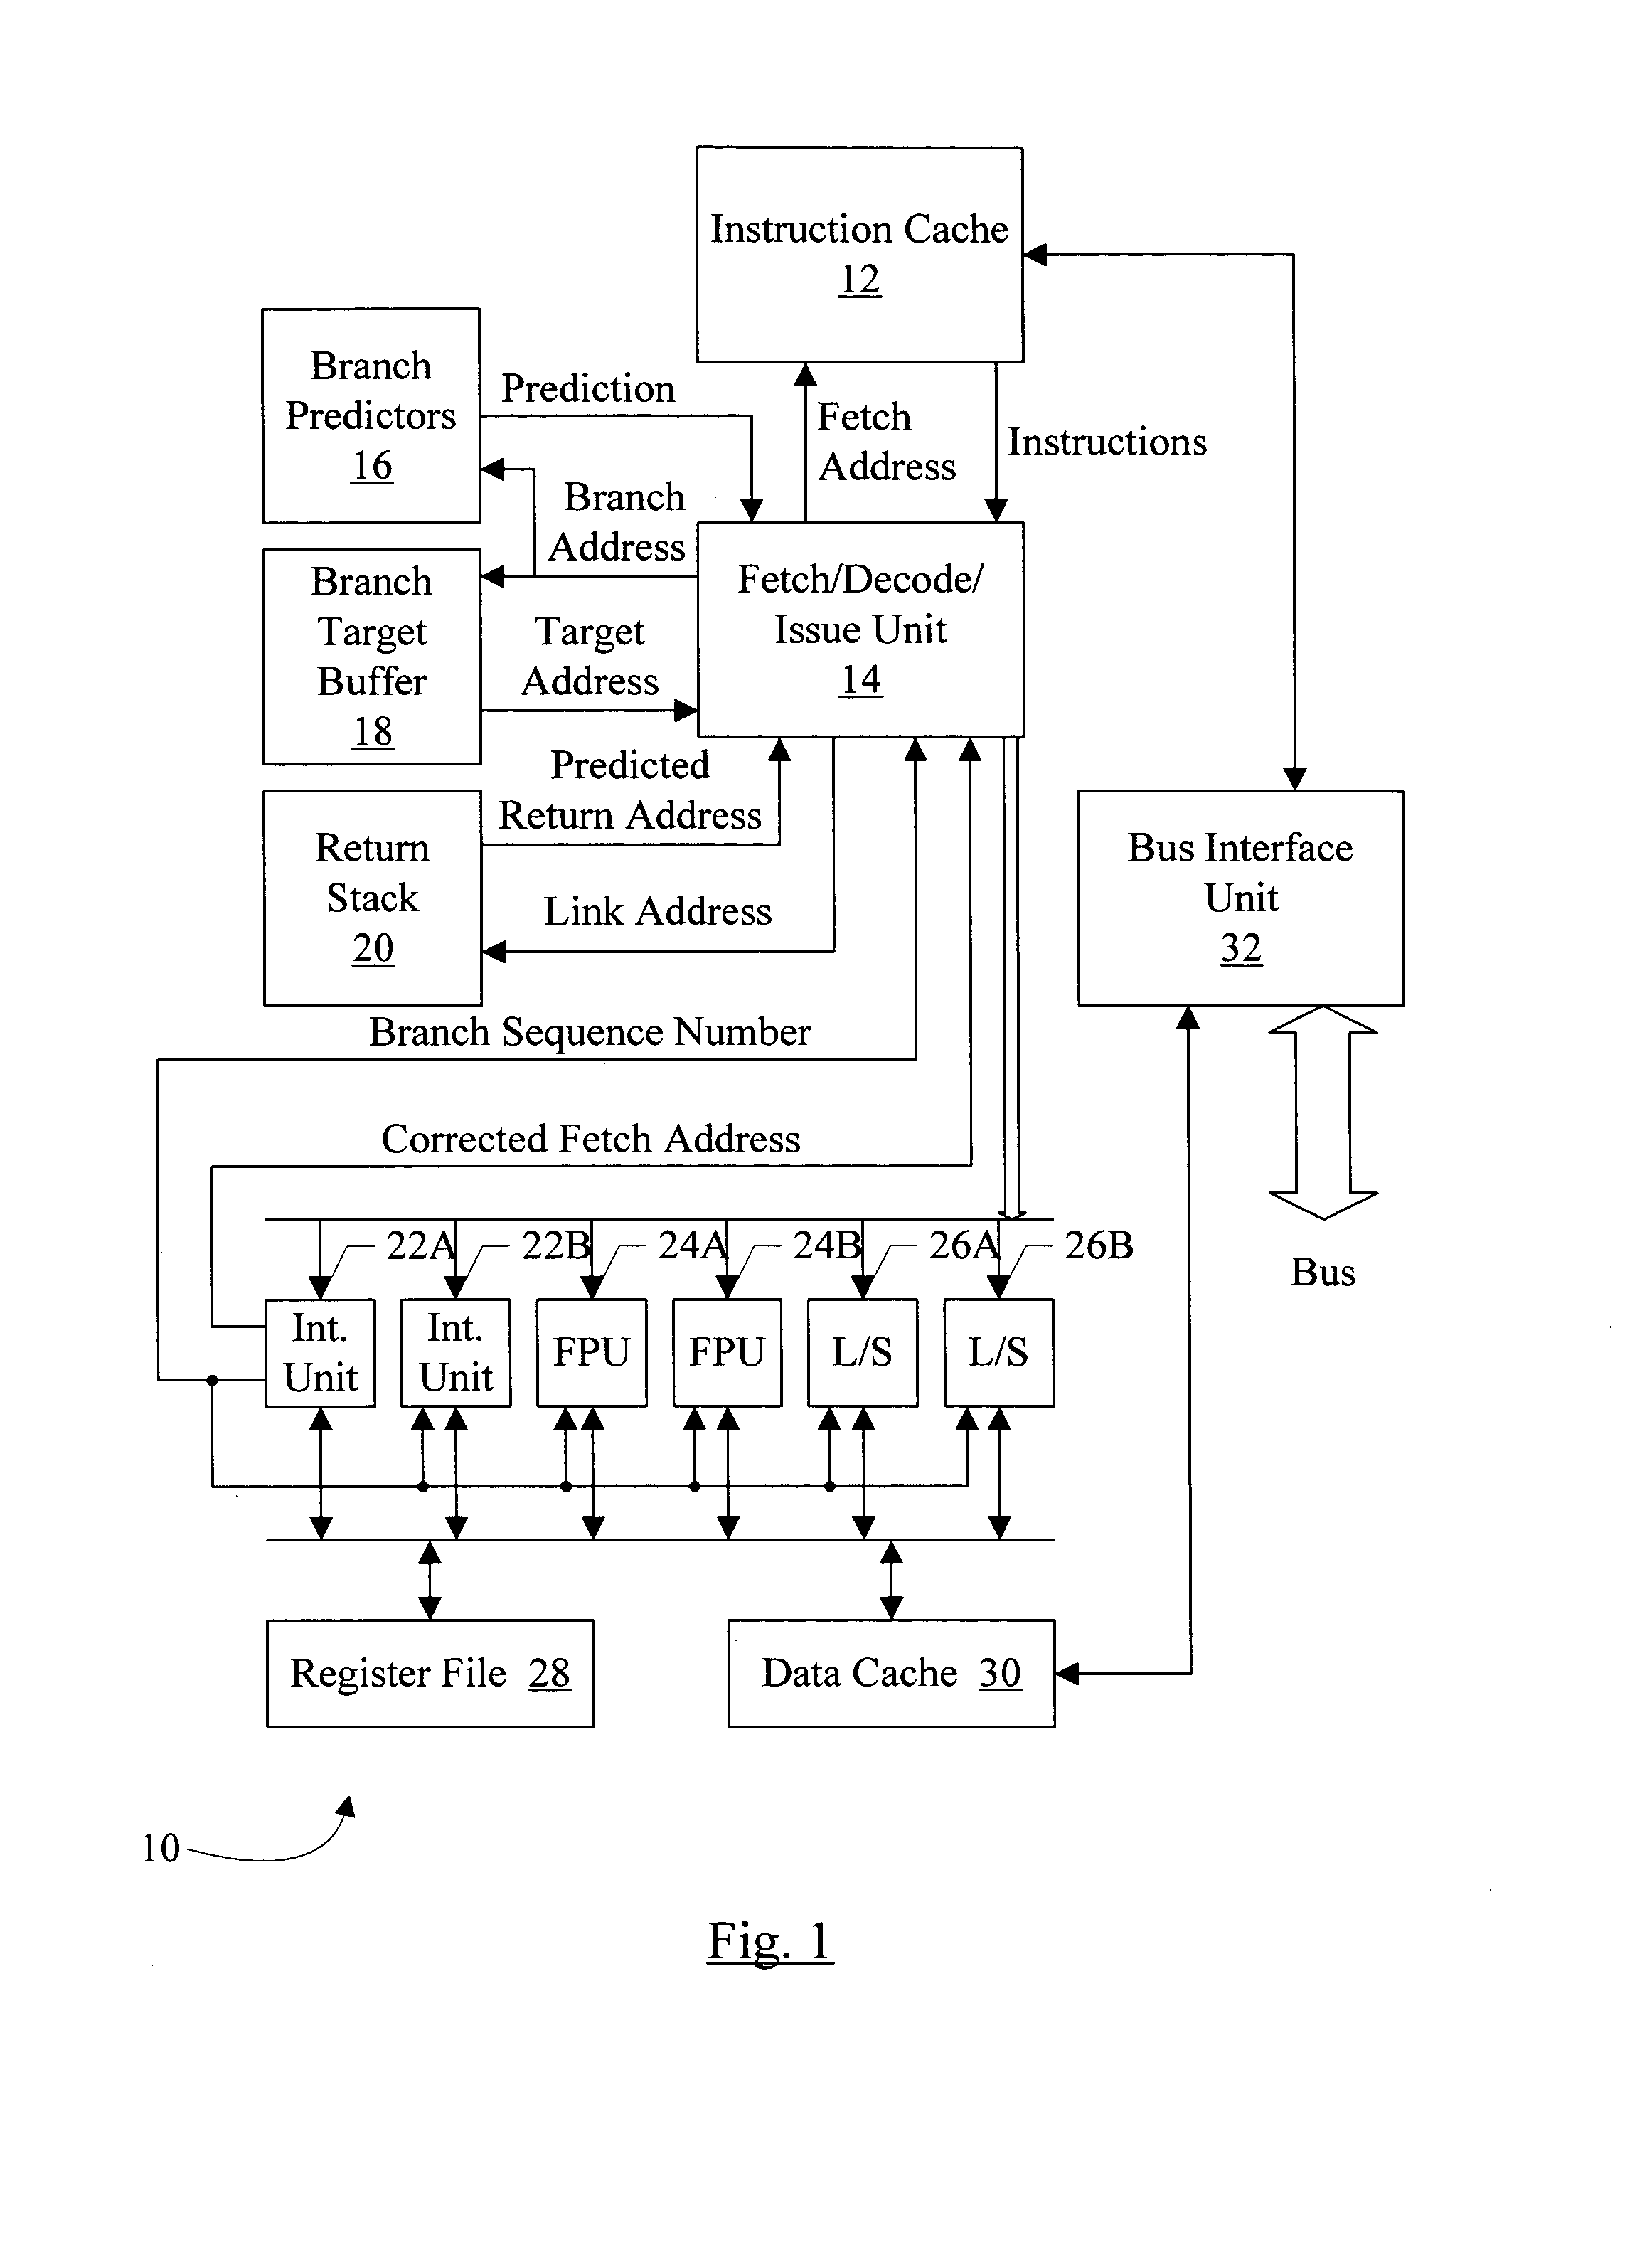 Method for cancelling speculative conditional delay slot instructions